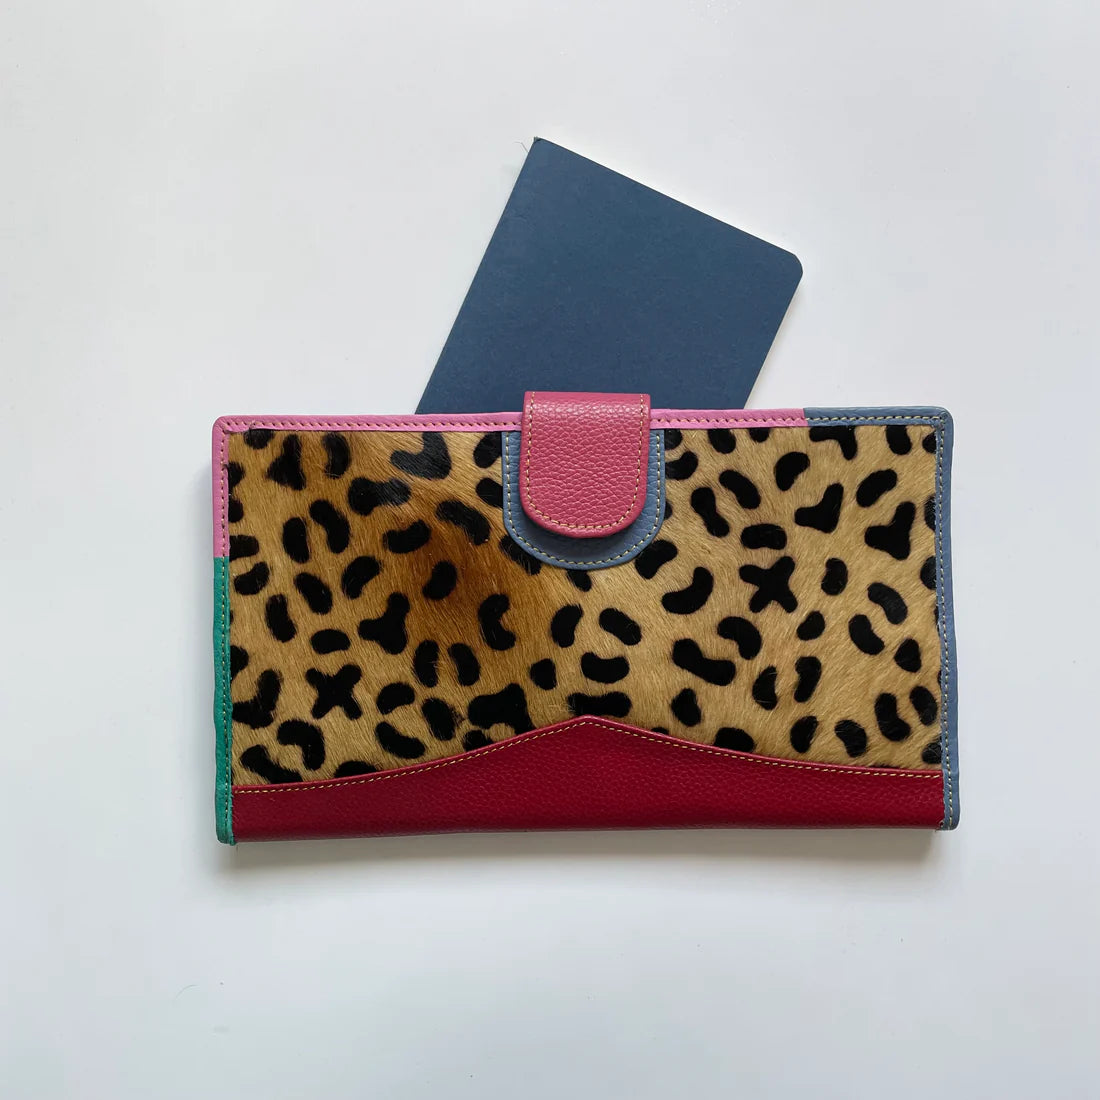 Eve organiser  pink with red leopard print